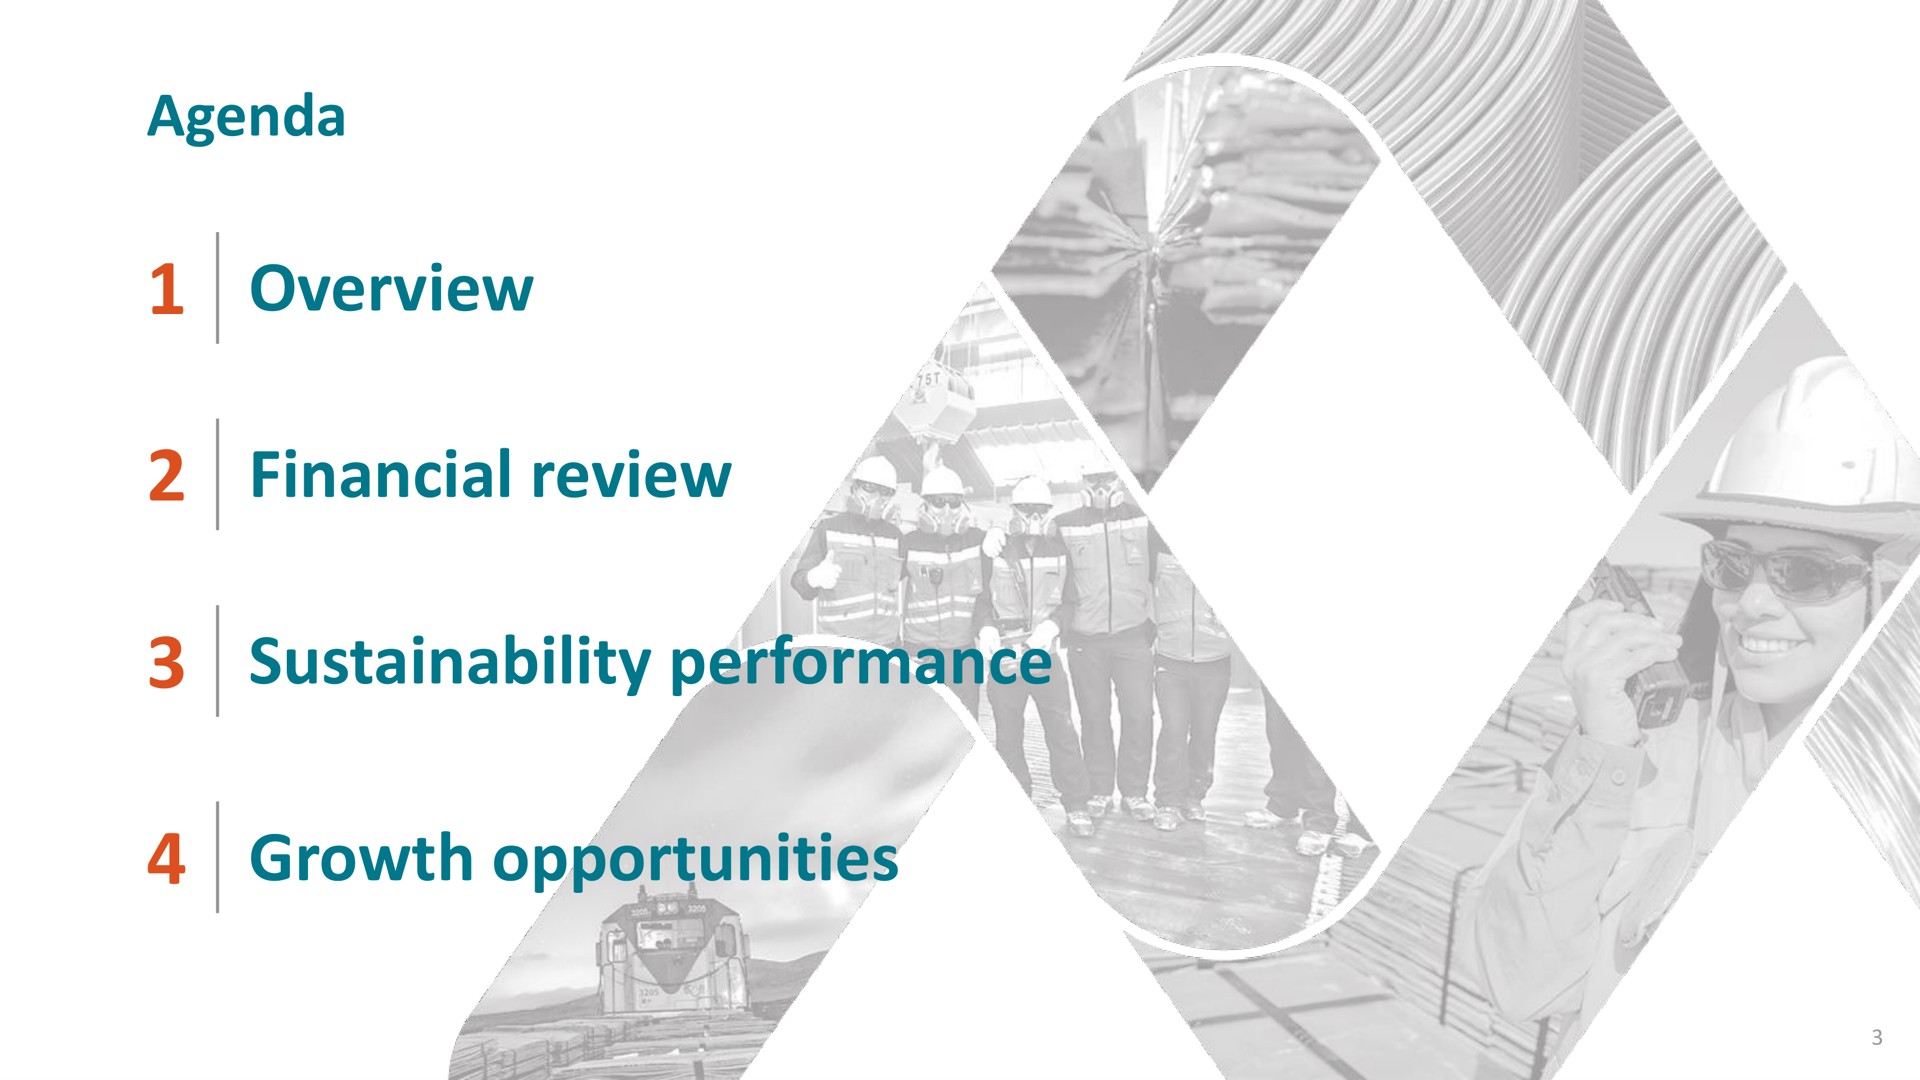 agenda overview financial review performance growth opportunities | Antofagasta